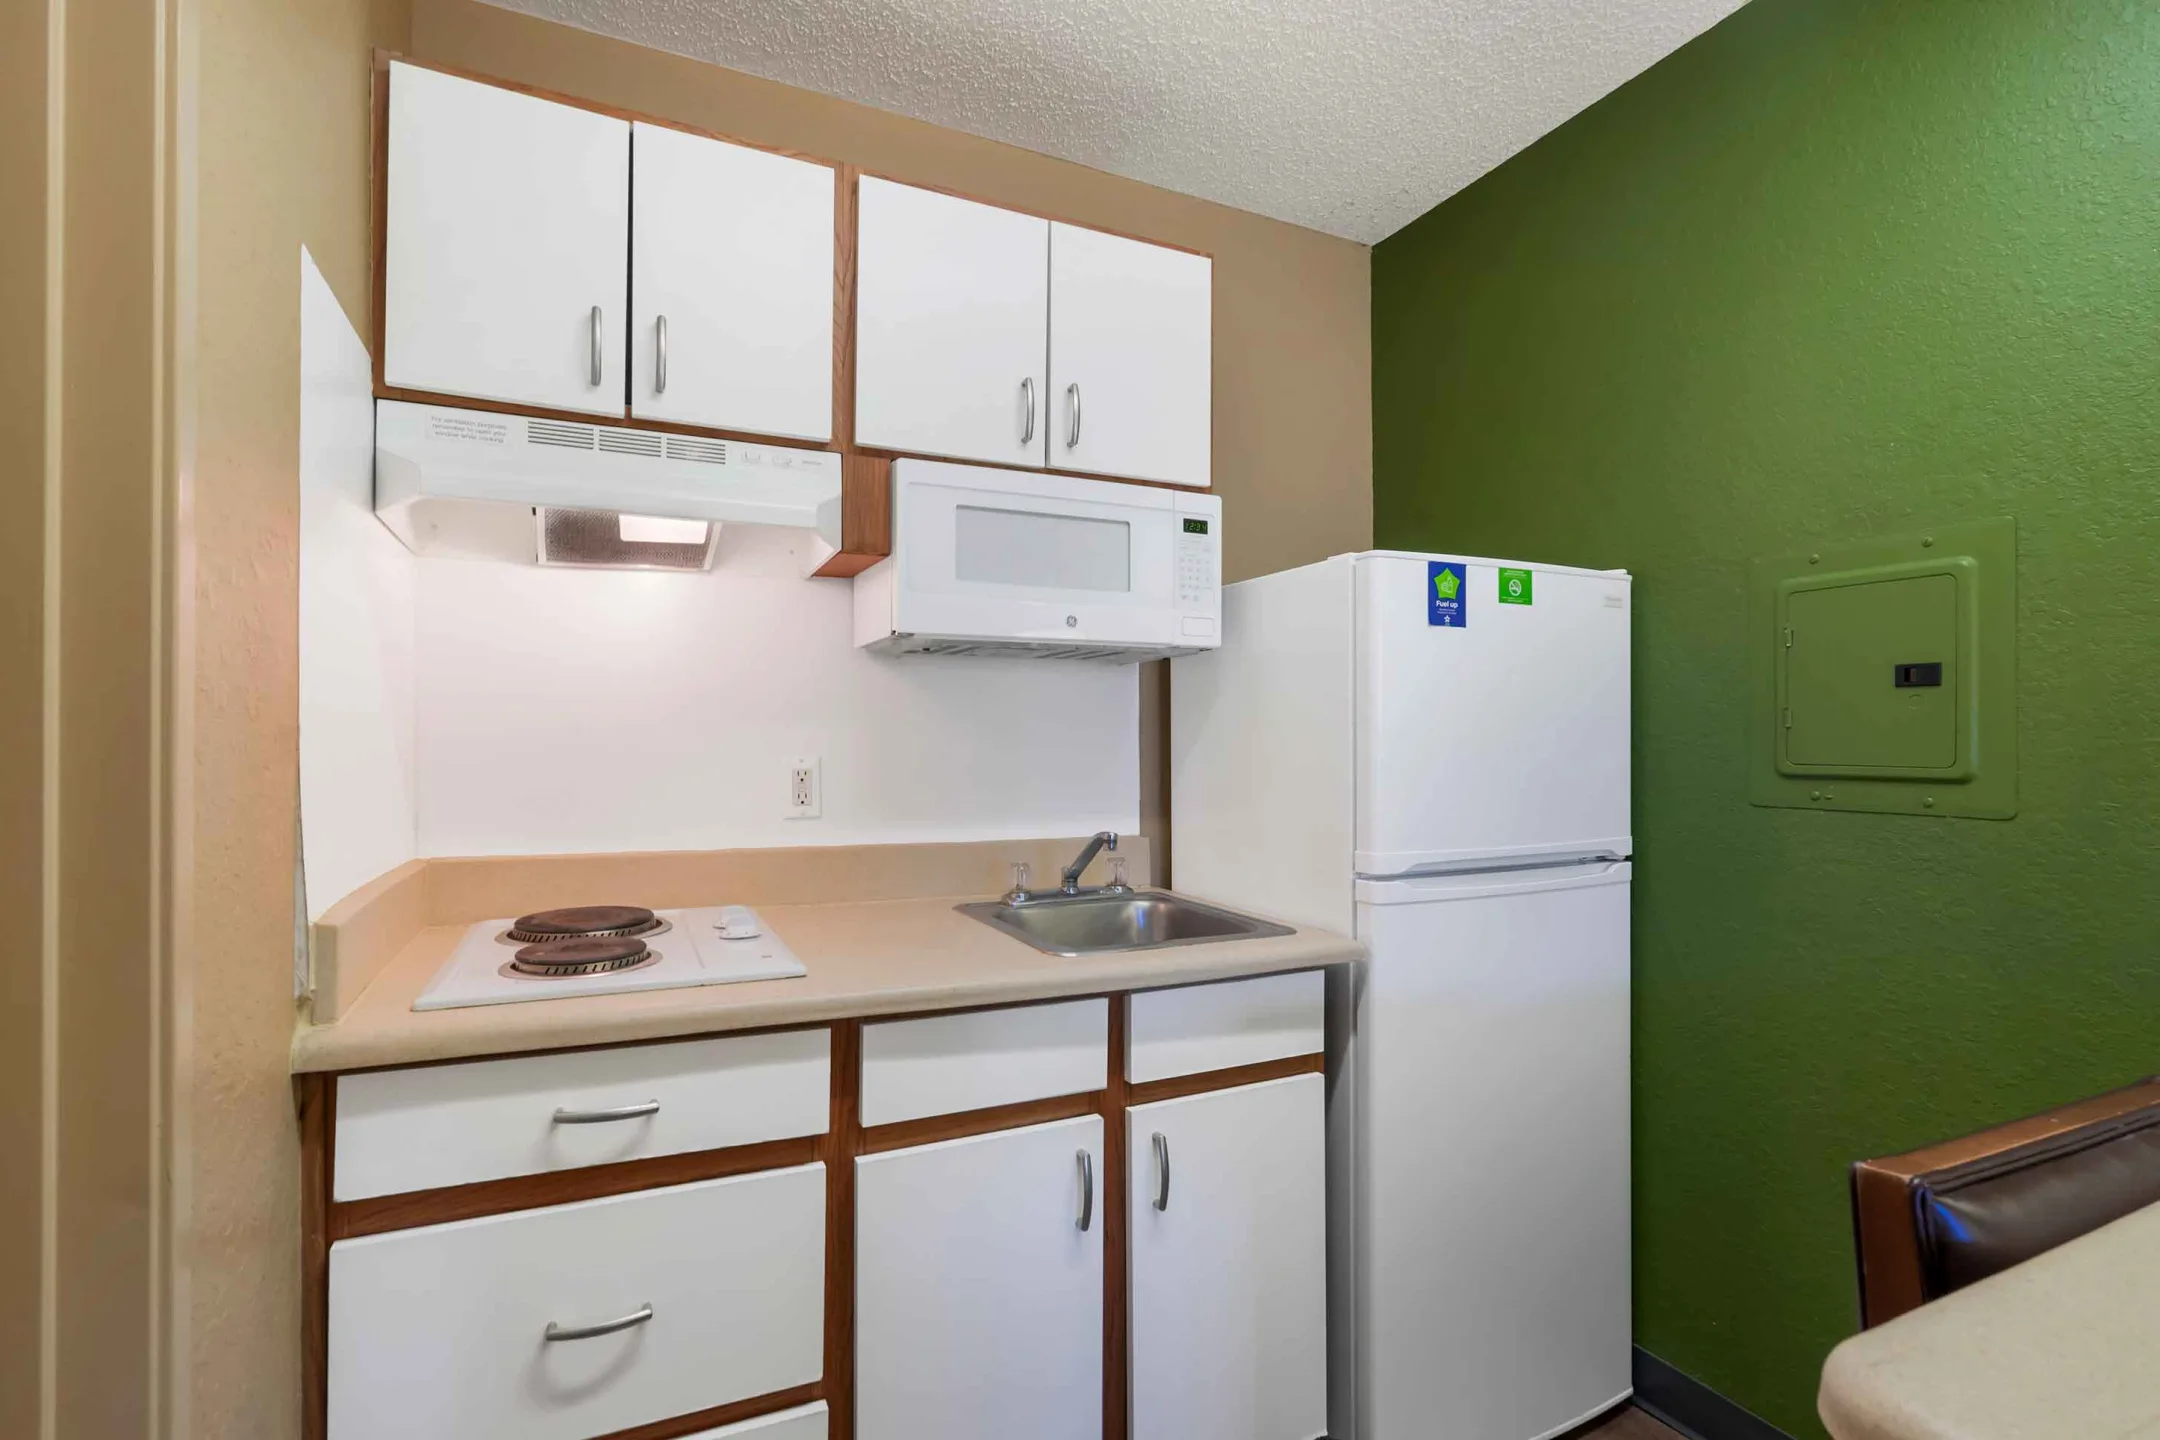 Kitchen - Furnished Studio - Clearwater - Carillon Park - Clearwater, FL